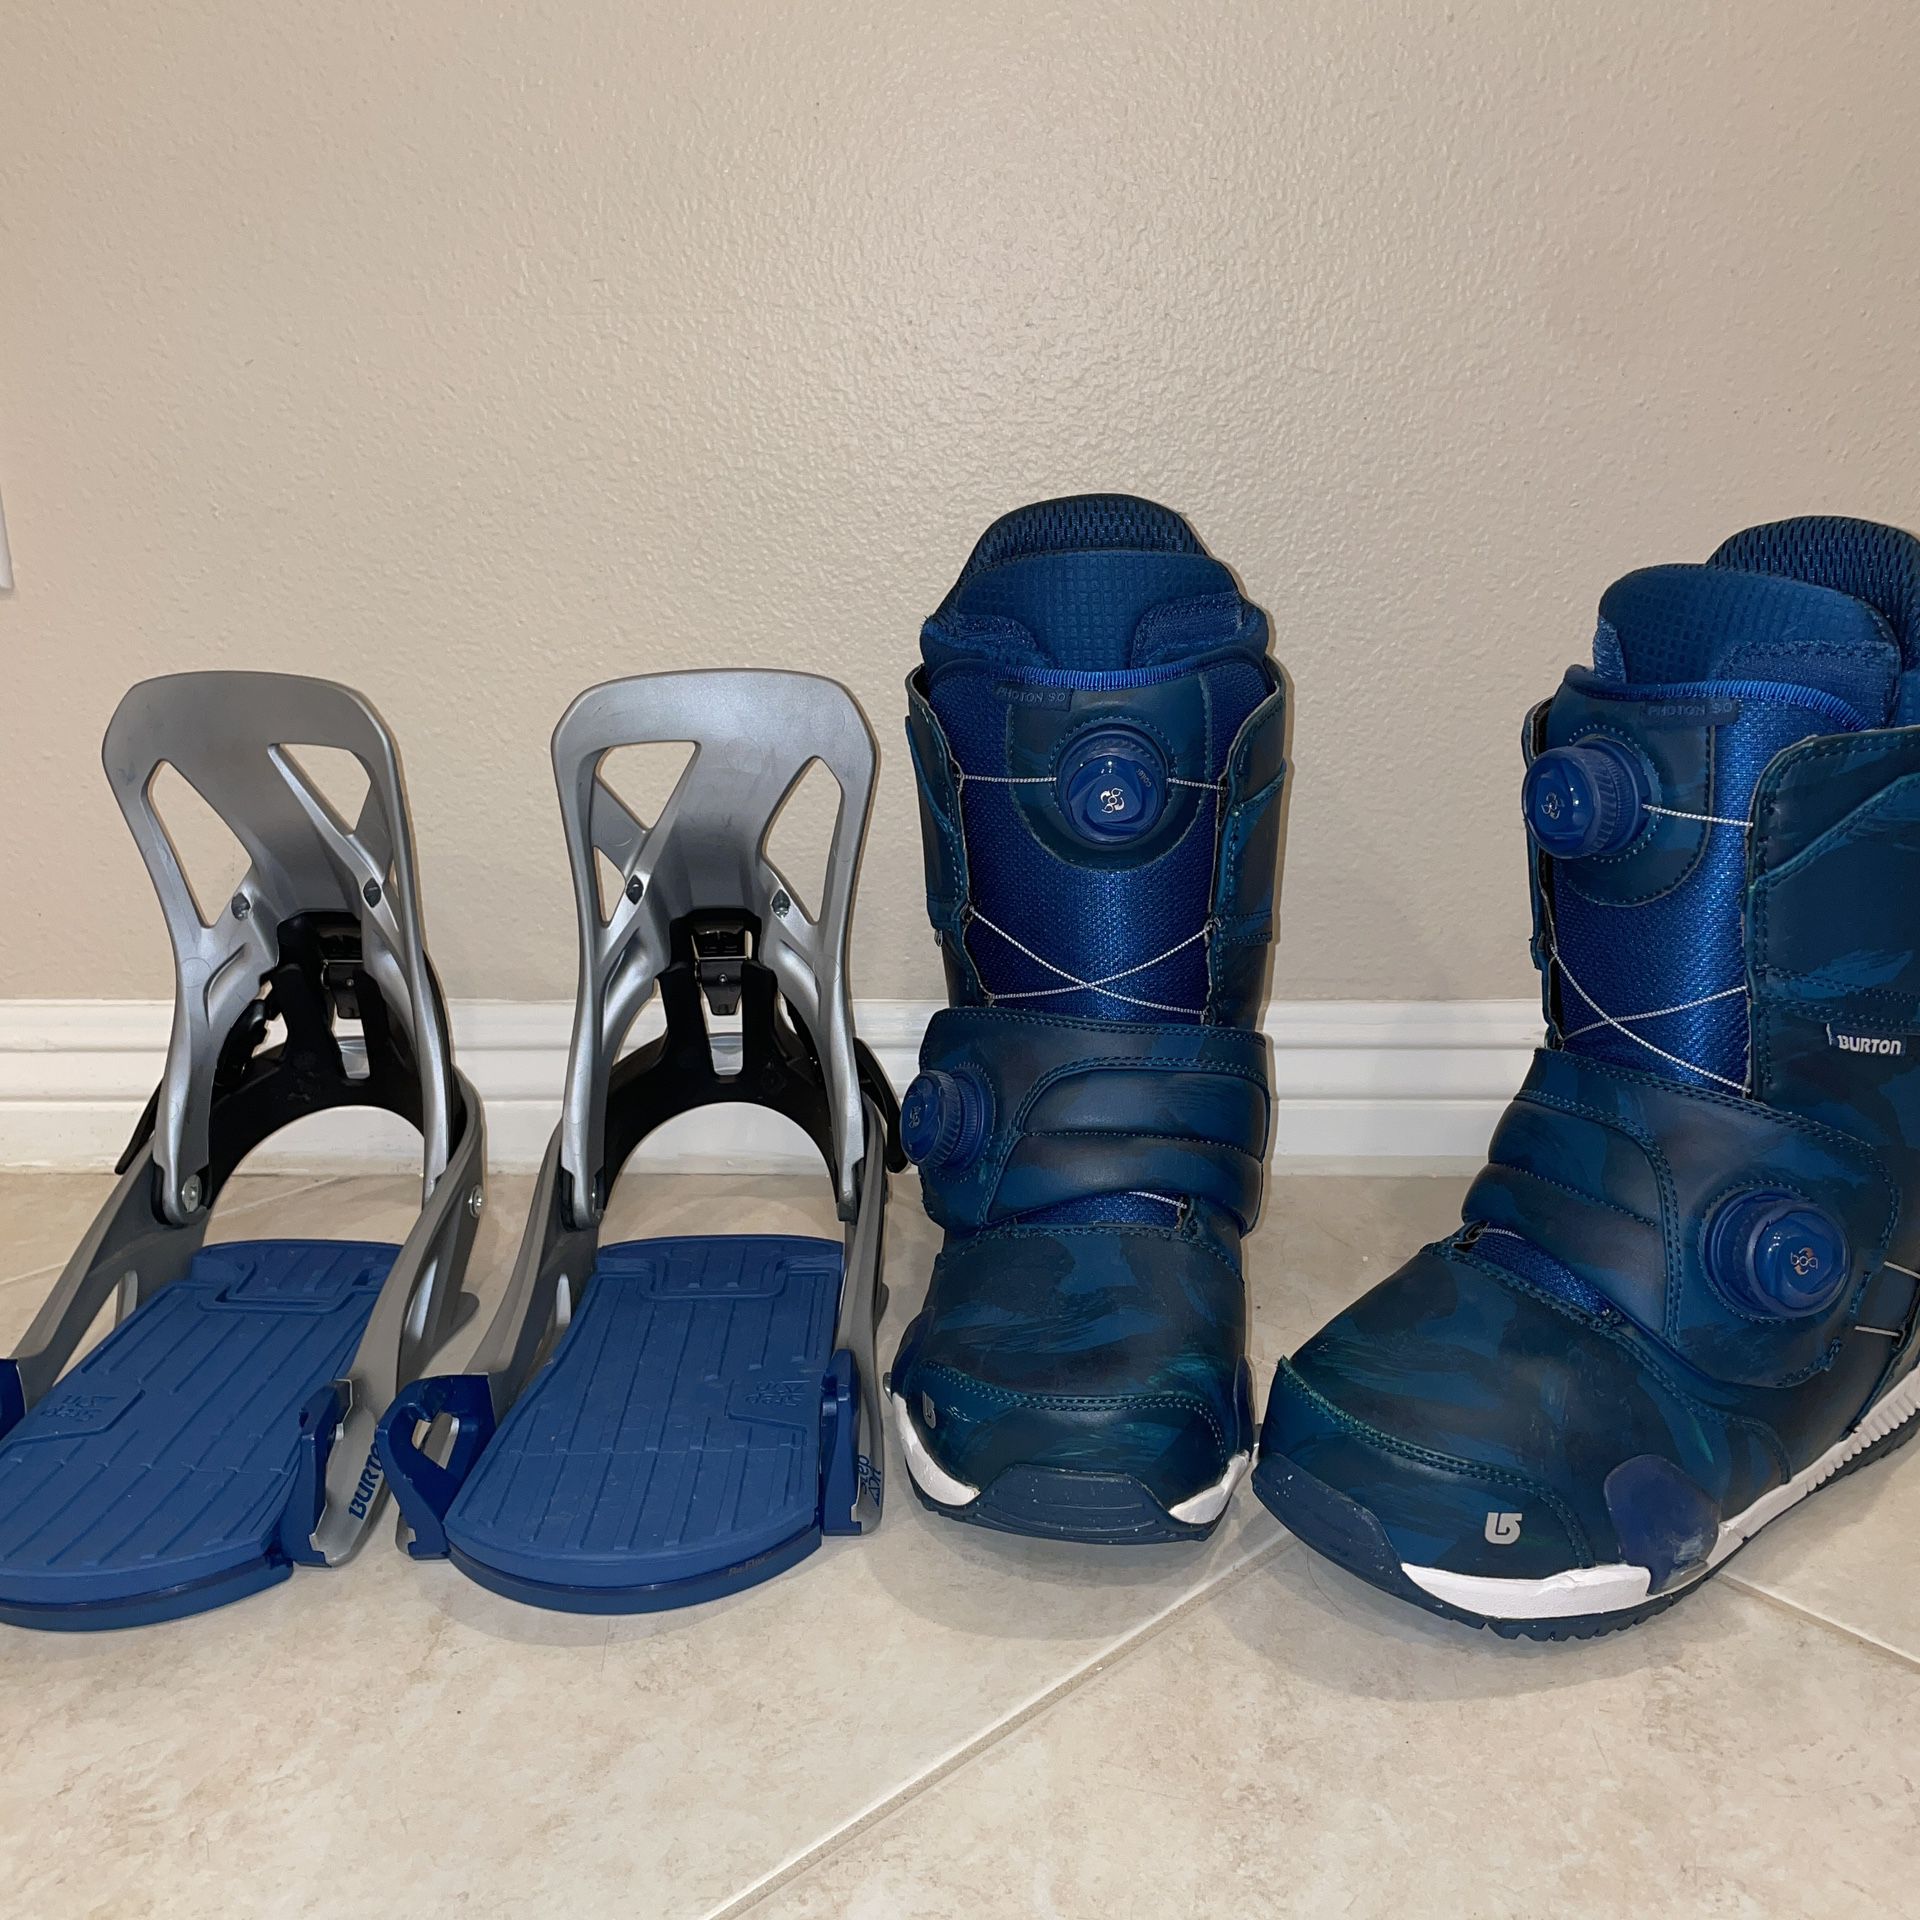 Burton step on Snowboard boots and bindings set for Sale in 